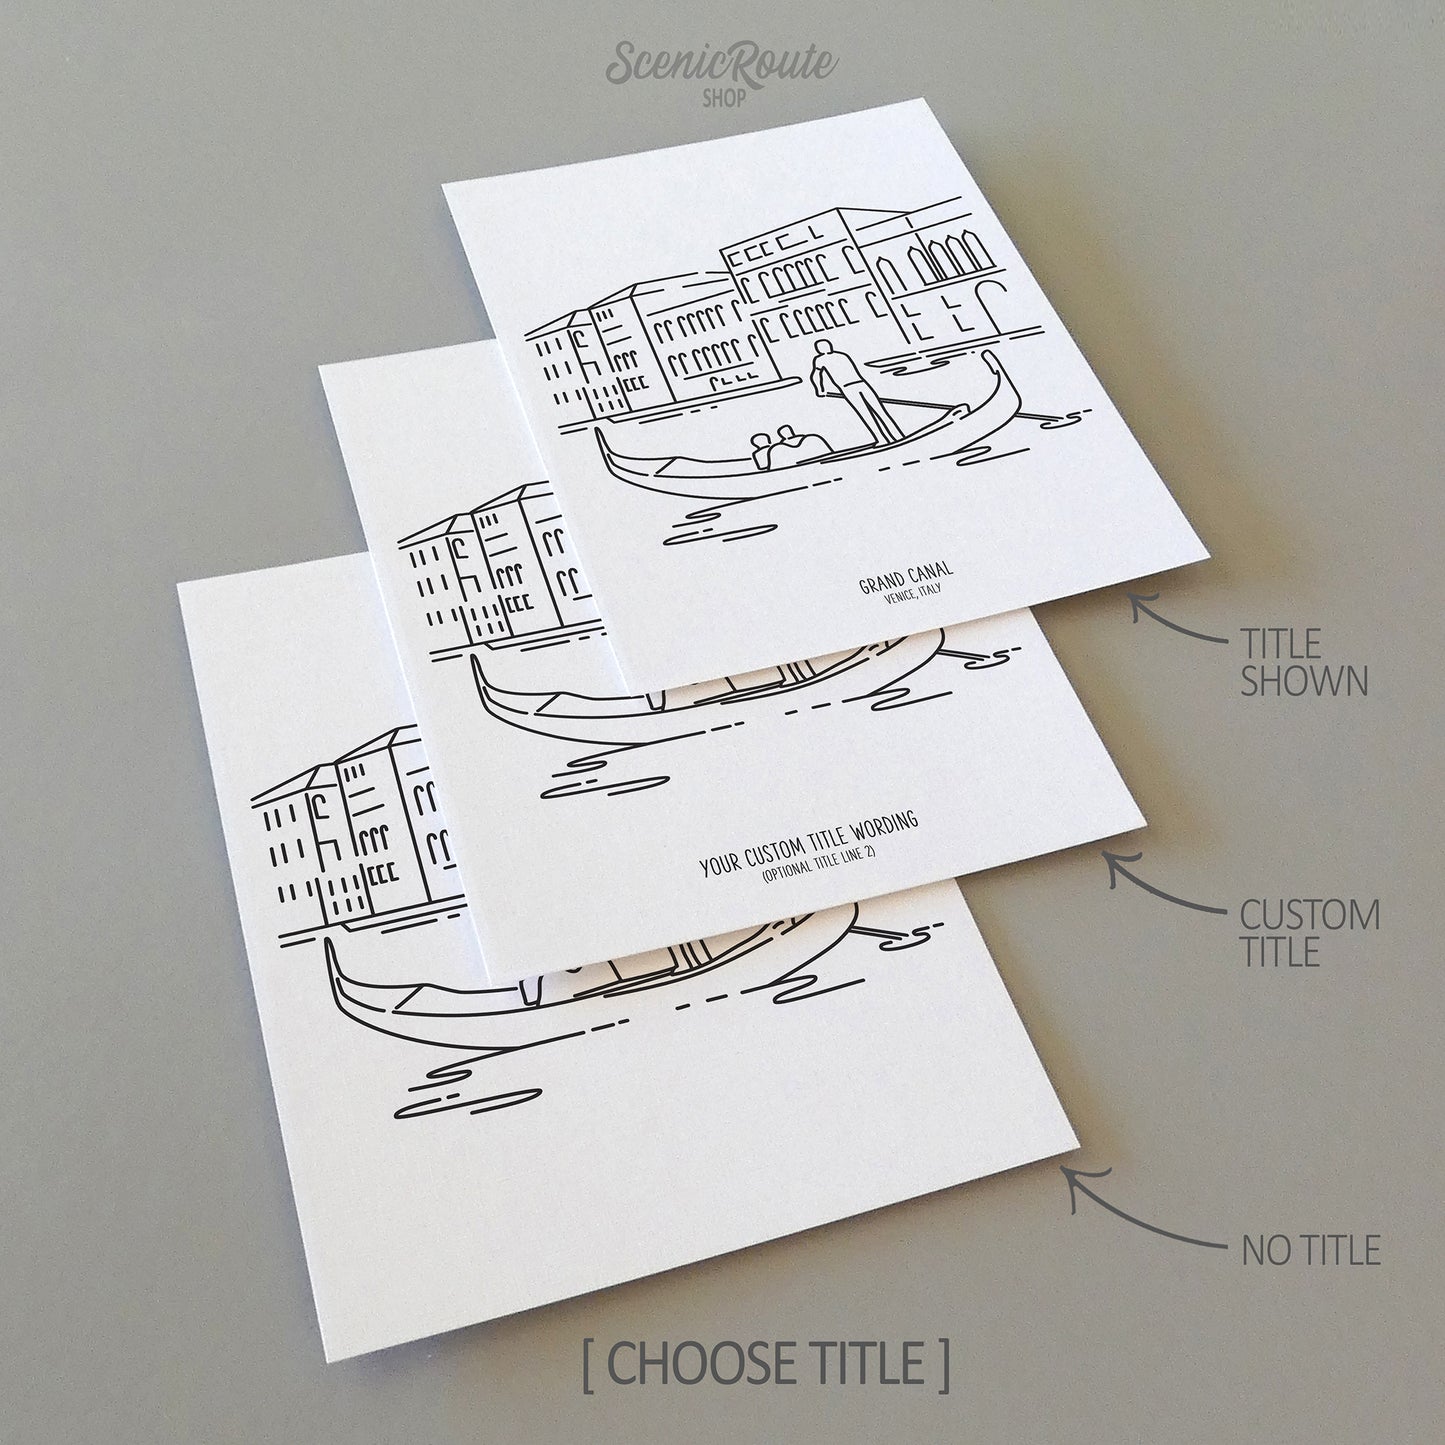 Three line art drawings of a Gondola on the Grand Canal in Venice Italy on white linen paper with a gray background.  The pieces are shown with title options that can be chosen and personalized.